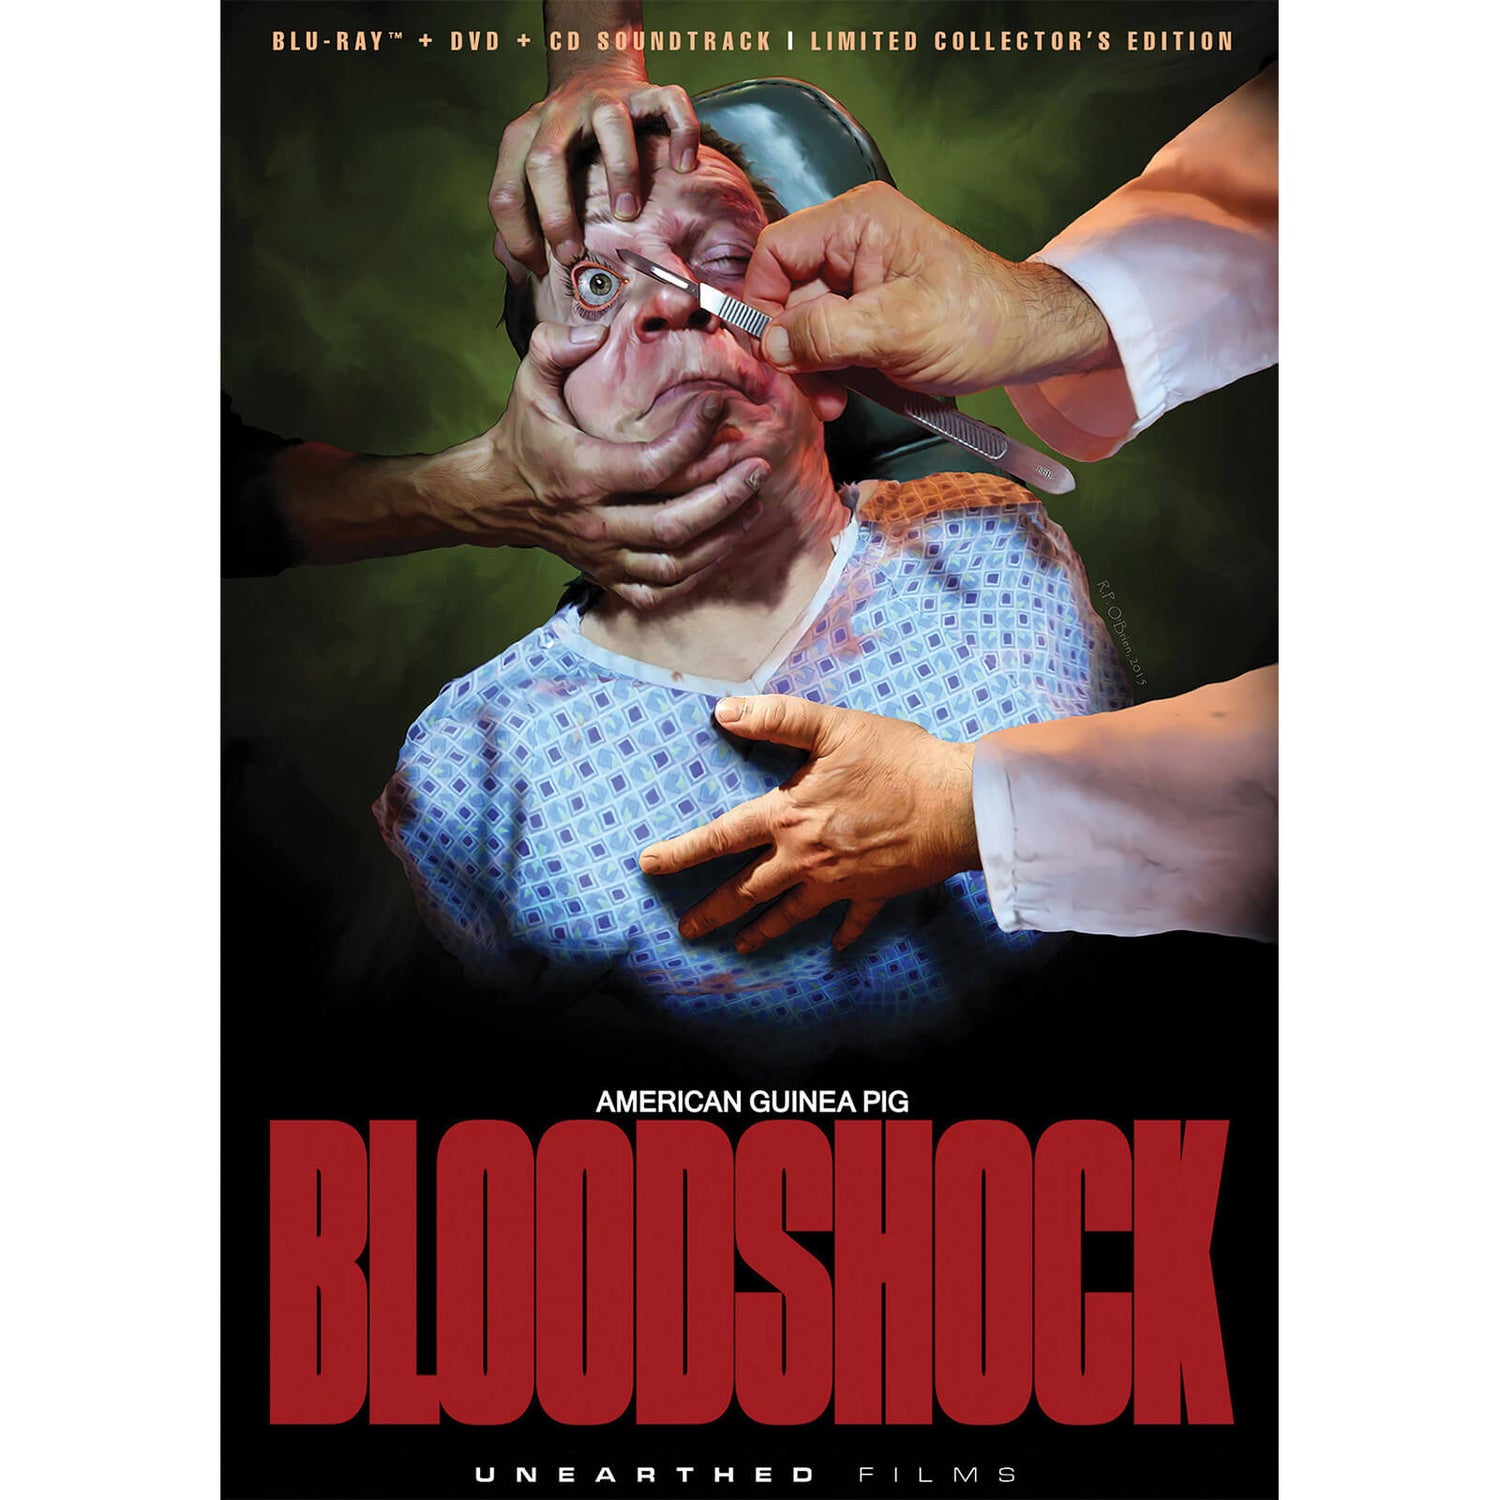 American Guinea Pig: Bloodshock: Limited Collector's Edition (Includes DVD & CD)